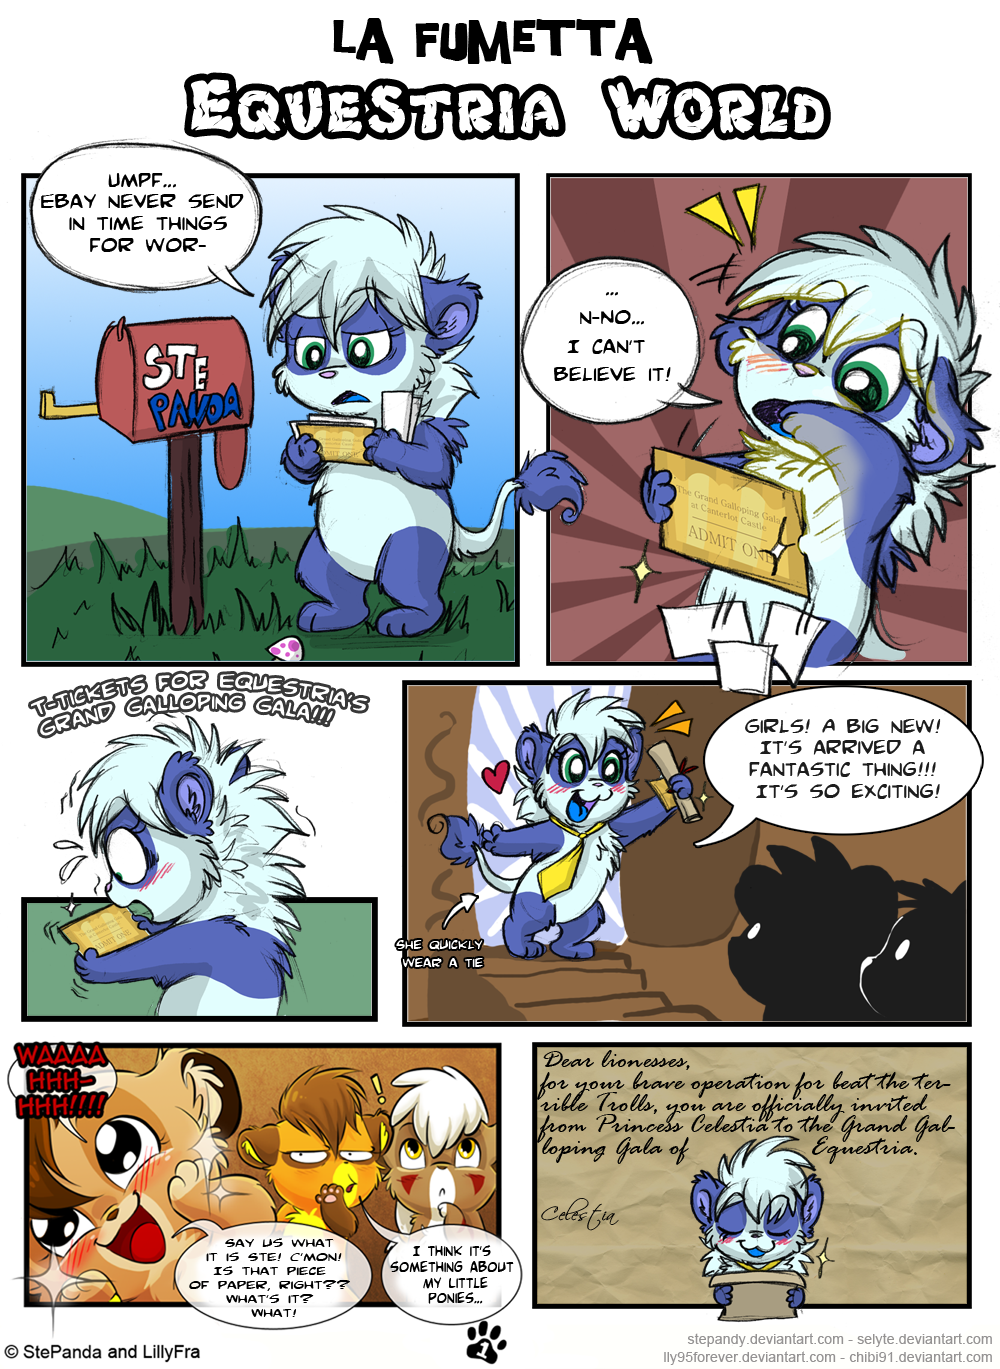 [Obrázek: equestria_world___page_1_by_stepandy-d58bwst.png]